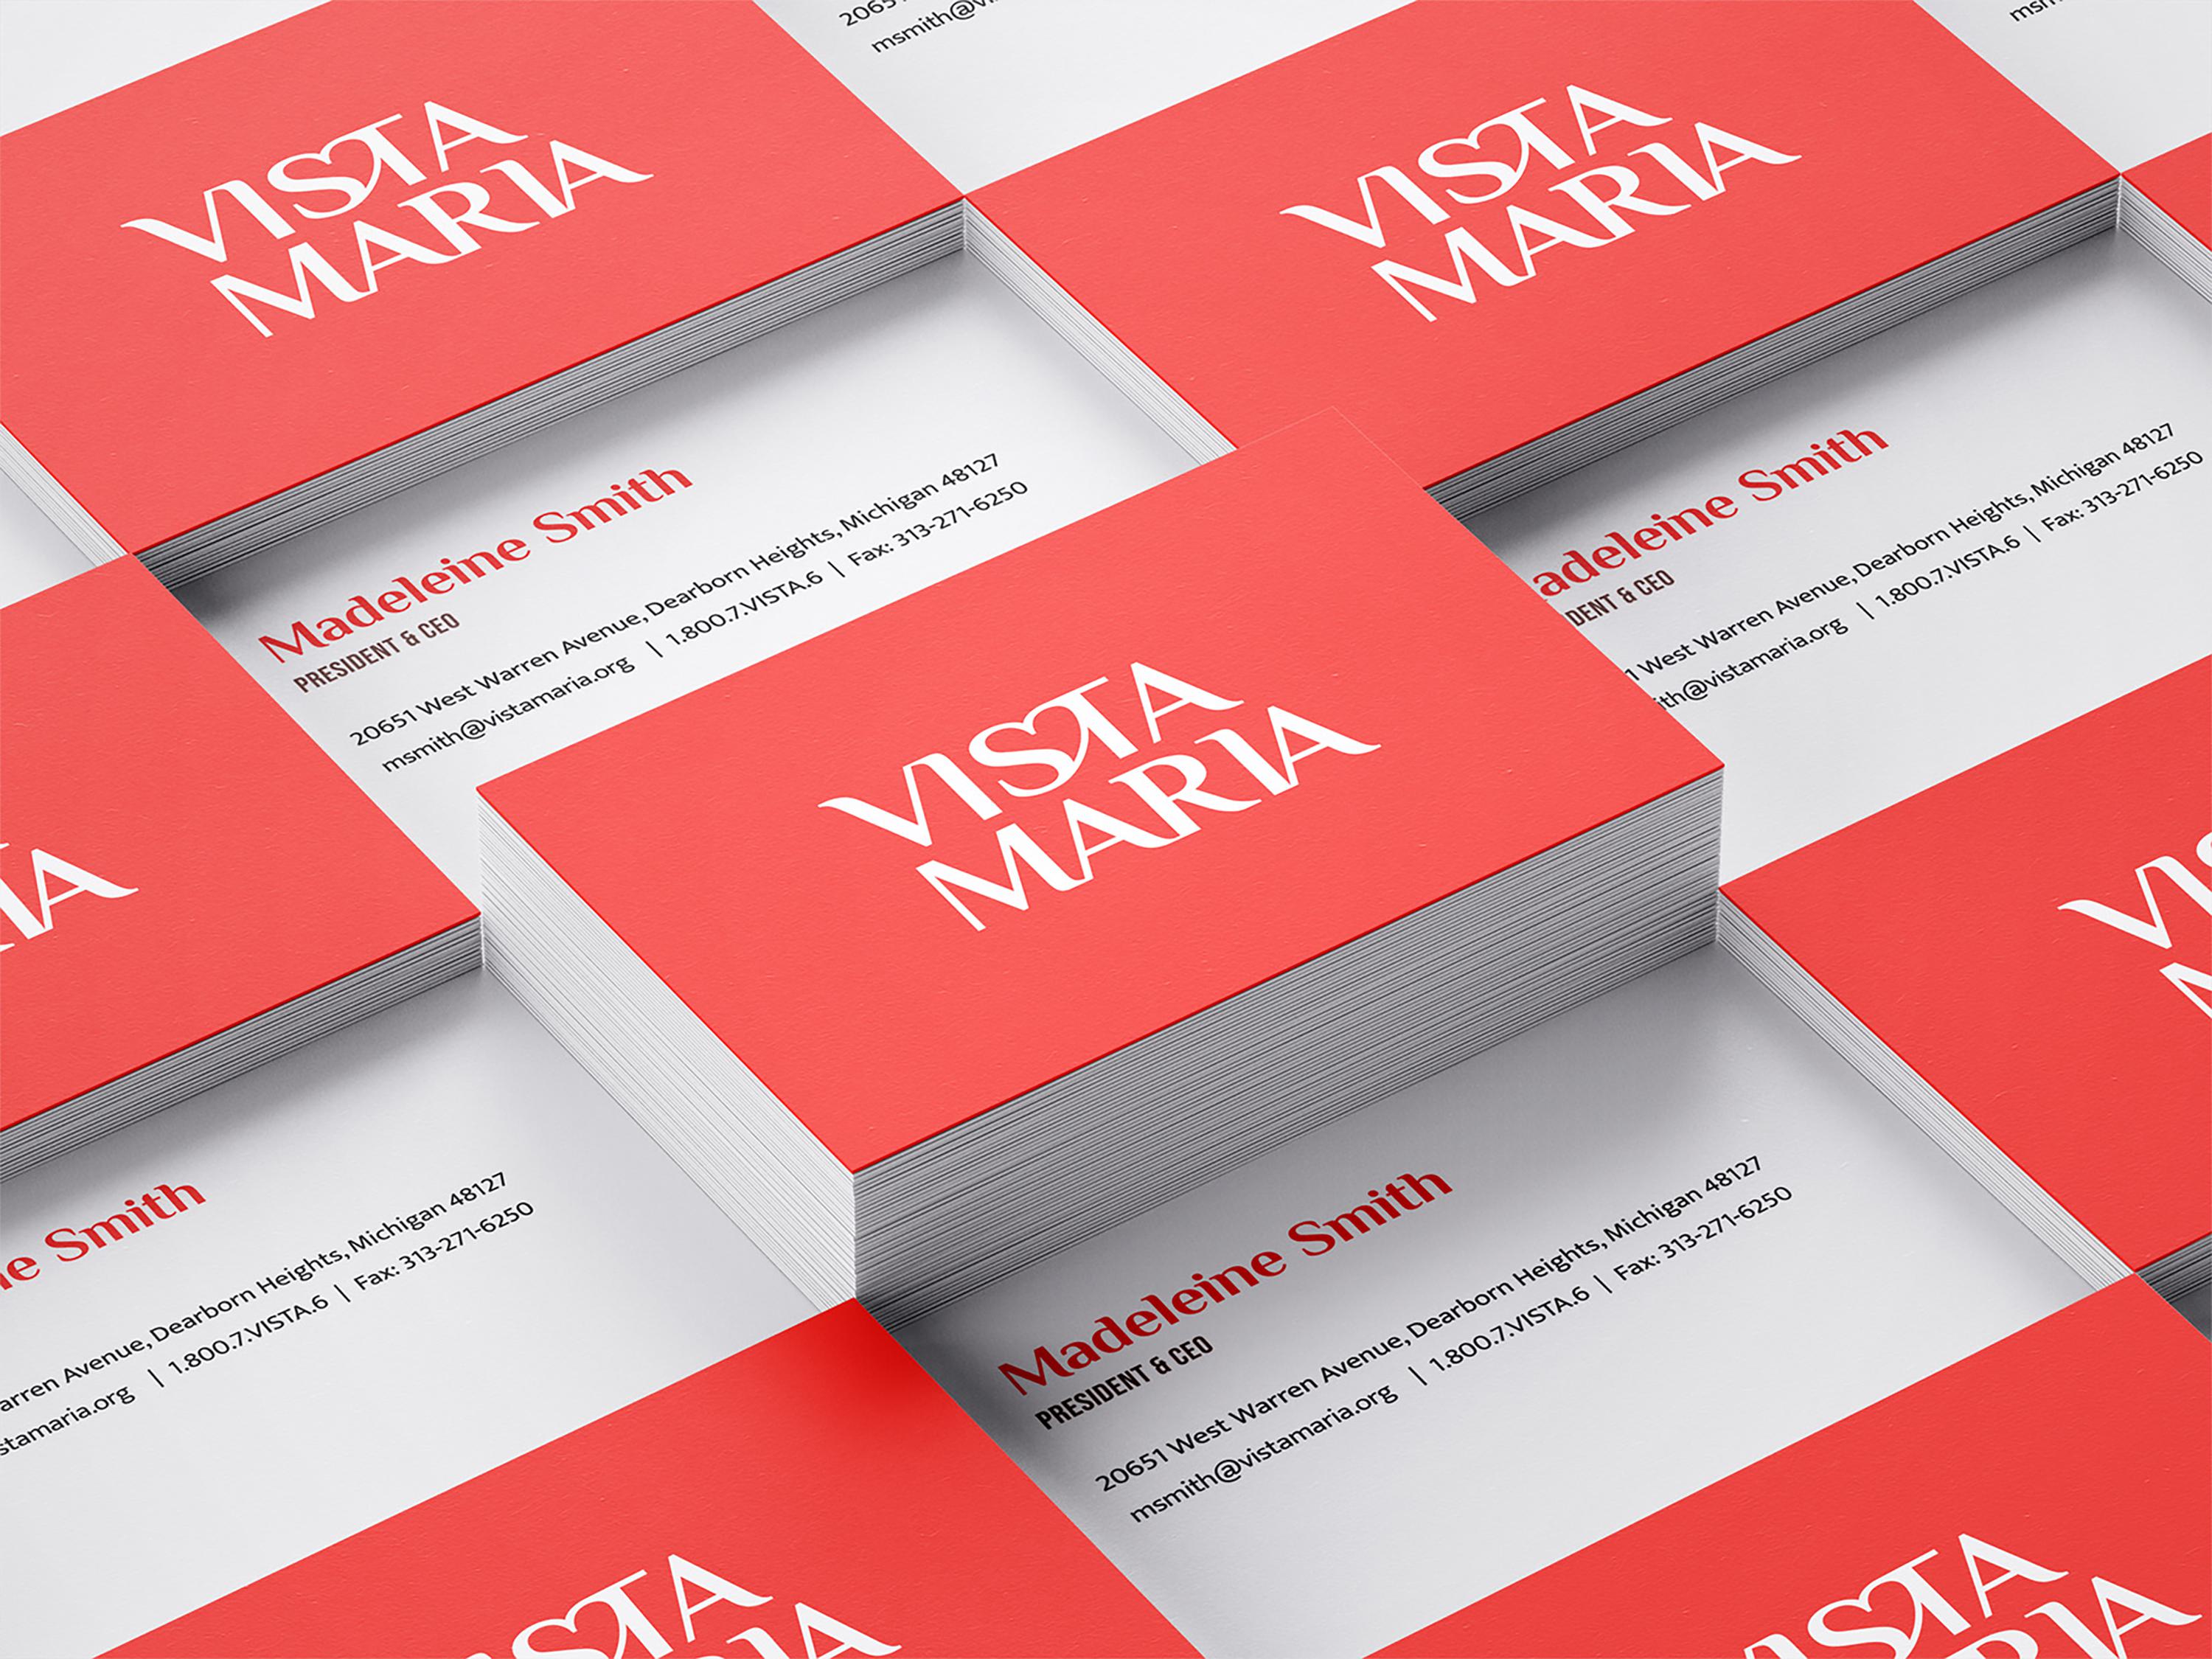 Stacks of Vista Maria business cards - front and back.